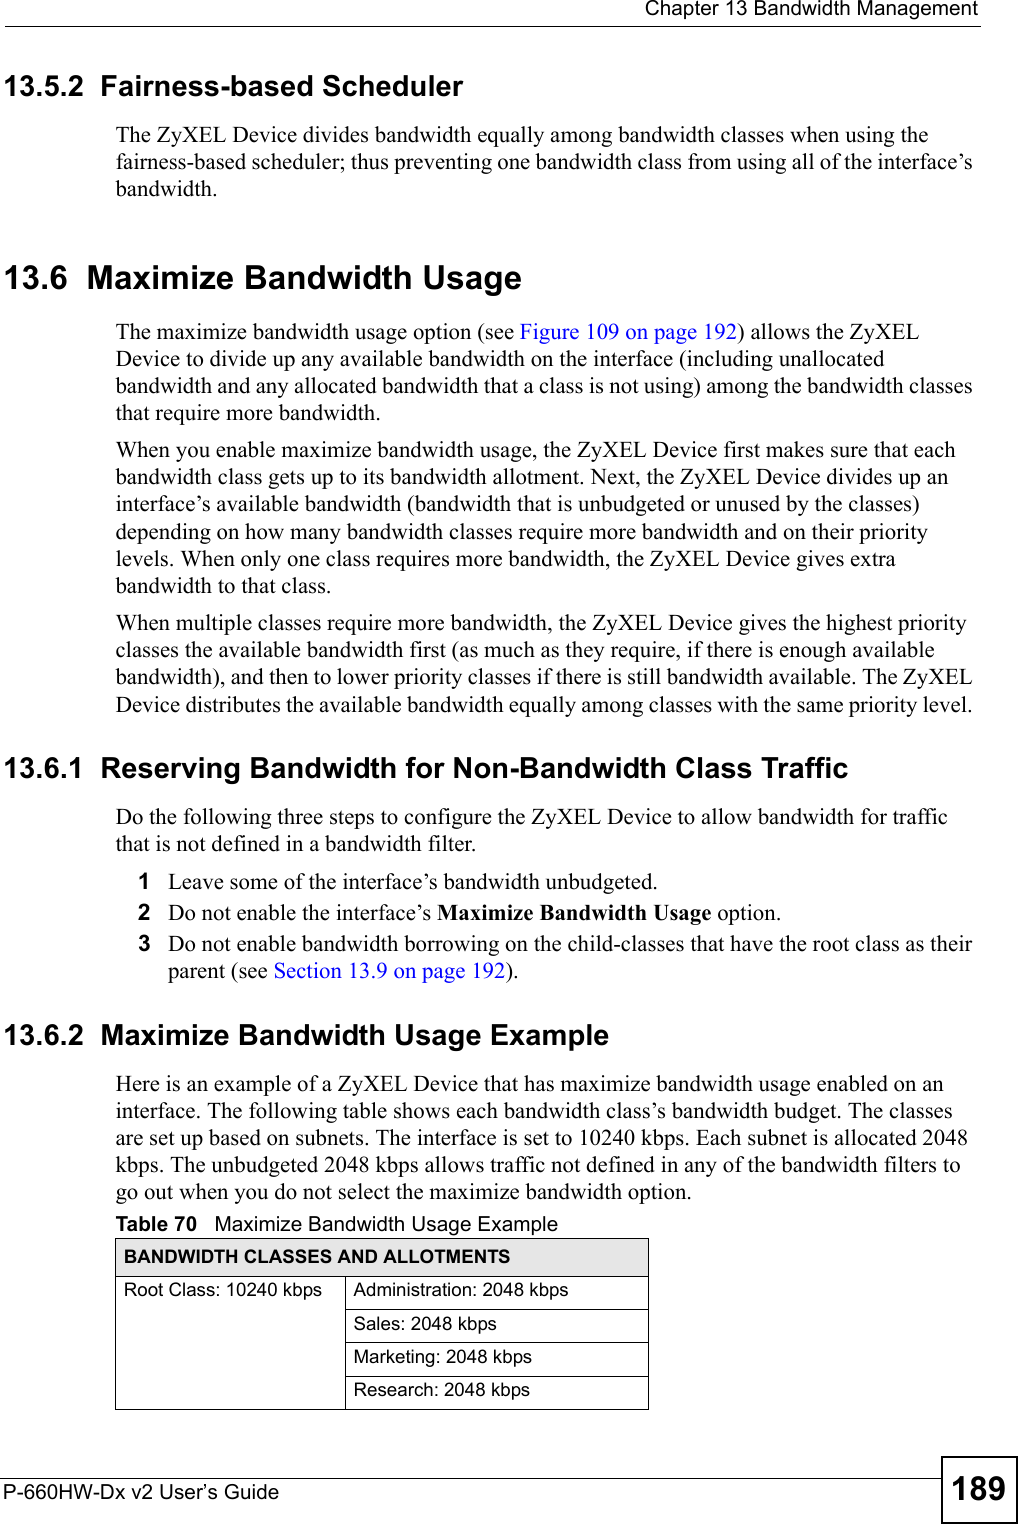  Chapter 13 Bandwidth ManagementP-660HW-Dx v2 User’s Guide 18913.5.2  Fairness-based SchedulerThe ZyXEL Device divides bandwidth equally among bandwidth classes when using the fairness-based scheduler; thus preventing one bandwidth class from using all of the interface’s bandwidth. 13.6  Maximize Bandwidth UsageThe maximize bandwidth usage option (see Figure 109 on page 192) allows the ZyXEL Device to divide up any available bandwidth on the interface (including unallocated bandwidth and any allocated bandwidth that a class is not using) among the bandwidth classes that require more bandwidth. When you enable maximize bandwidth usage, the ZyXEL Device first makes sure that each bandwidth class gets up to its bandwidth allotment. Next, the ZyXEL Device divides up an interface’s available bandwidth (bandwidth that is unbudgeted or unused by the classes) depending on how many bandwidth classes require more bandwidth and on their priority levels. When only one class requires more bandwidth, the ZyXEL Device gives extra bandwidth to that class. When multiple classes require more bandwidth, the ZyXEL Device gives the highest priority classes the available bandwidth first (as much as they require, if there is enough available bandwidth), and then to lower priority classes if there is still bandwidth available. The ZyXEL Device distributes the available bandwidth equally among classes with the same priority level. 13.6.1  Reserving Bandwidth for Non-Bandwidth Class TrafficDo the following three steps to configure the ZyXEL Device to allow bandwidth for traffic that is not defined in a bandwidth filter.1Leave some of the interface’s bandwidth unbudgeted.2Do not enable the interface’s Maximize Bandwidth Usage option.3Do not enable bandwidth borrowing on the child-classes that have the root class as their parent (see Section 13.9 on page 192).13.6.2  Maximize Bandwidth Usage ExampleHere is an example of a ZyXEL Device that has maximize bandwidth usage enabled on an interface. The following table shows each bandwidth class’s bandwidth budget. The classes are set up based on subnets. The interface is set to 10240 kbps. Each subnet is allocated 2048 kbps. The unbudgeted 2048 kbps allows traffic not defined in any of the bandwidth filters to go out when you do not select the maximize bandwidth option.Table 70   Maximize Bandwidth Usage ExampleBANDWIDTH CLASSES AND ALLOTMENTSRoot Class: 10240 kbps Administration: 2048 kbpsSales: 2048 kbpsMarketing: 2048 kbpsResearch: 2048 kbps